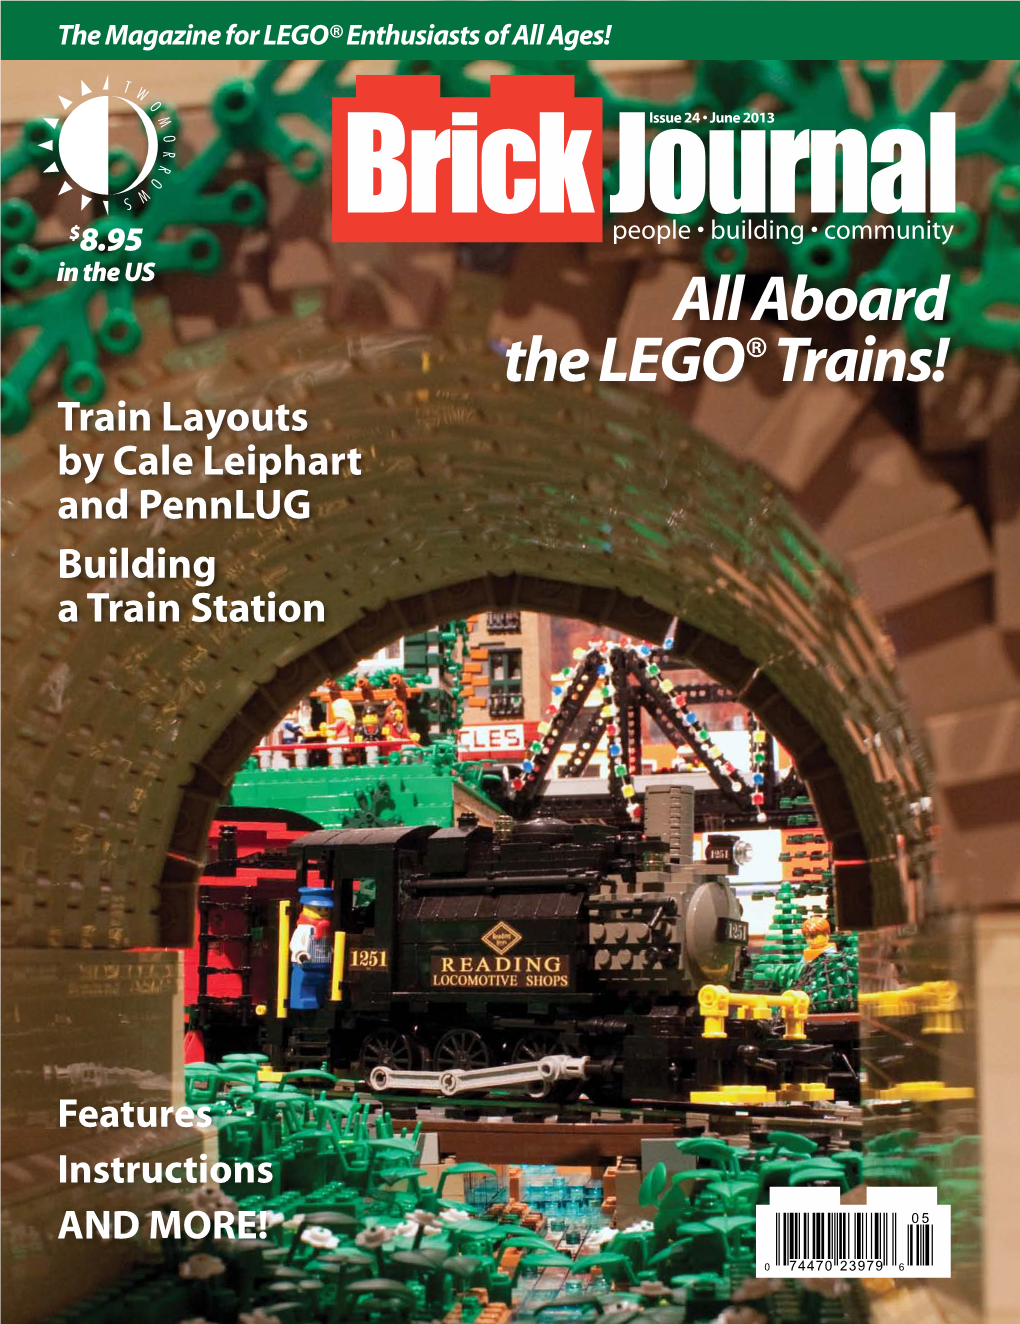 All Aboard the LEGO®Trains!